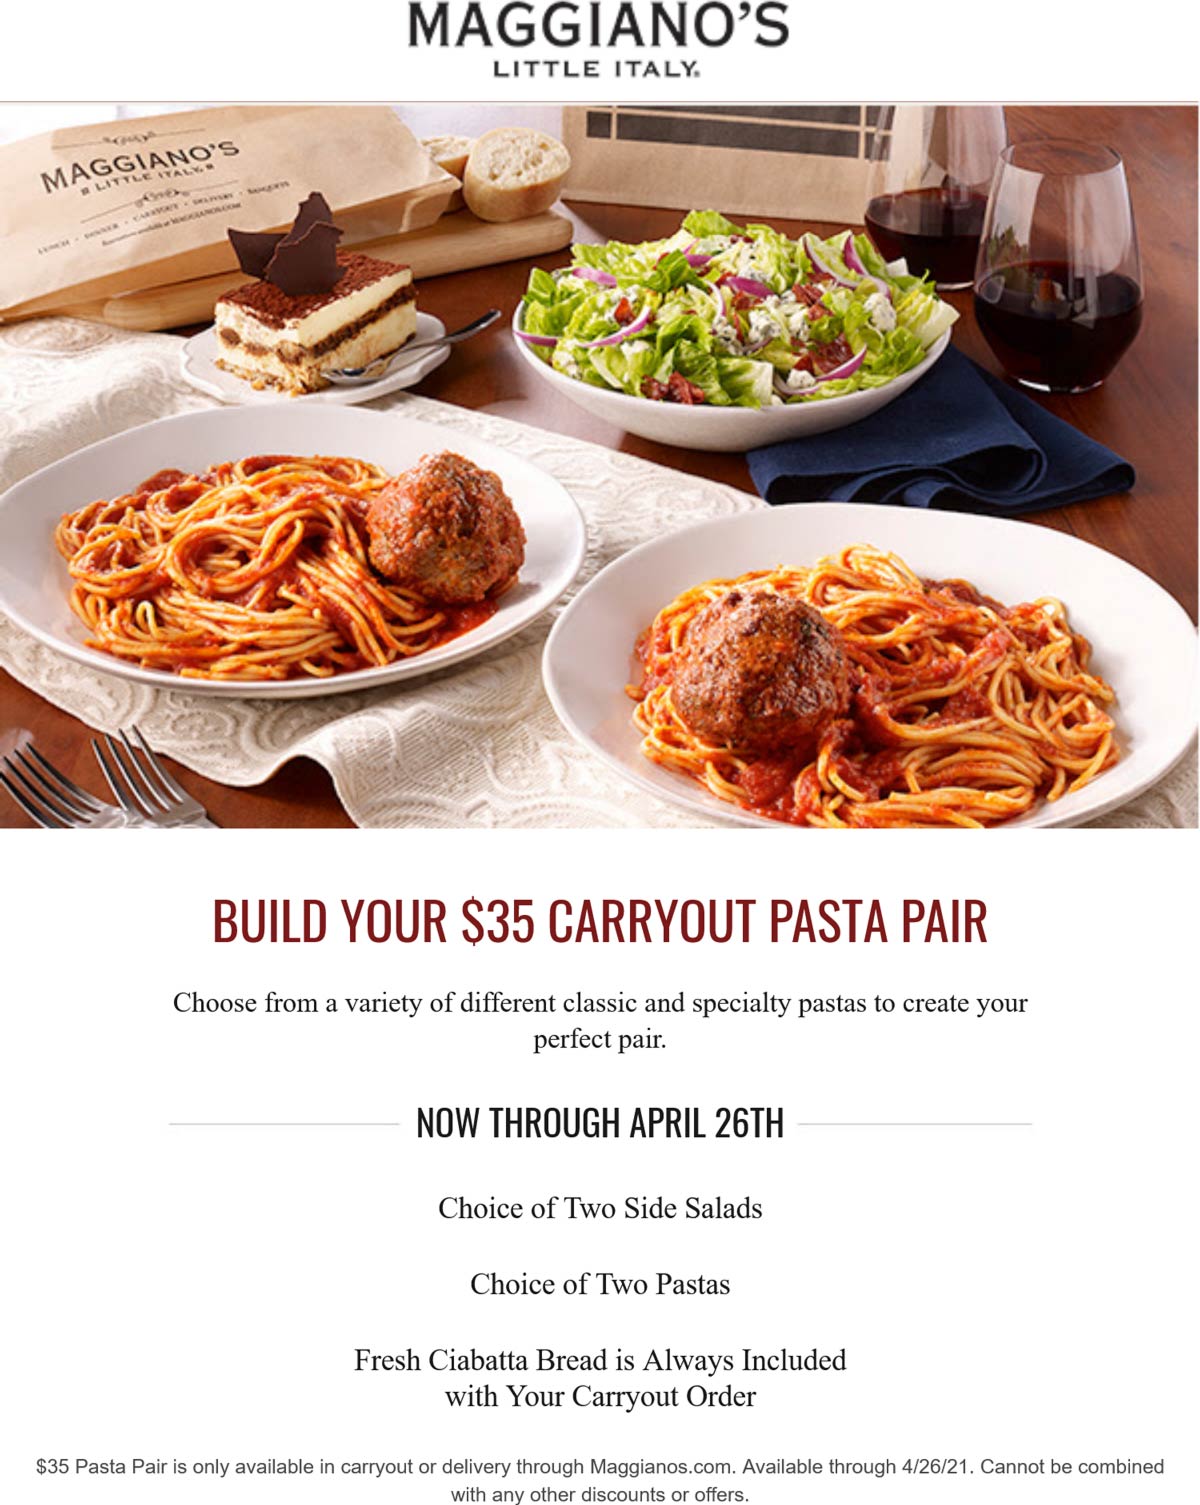 Maggianos Little Italy restaurants Coupon  2 Salads + 2 Pastas for $35 at Maggianos Little Italy #maggianoslittleitaly 